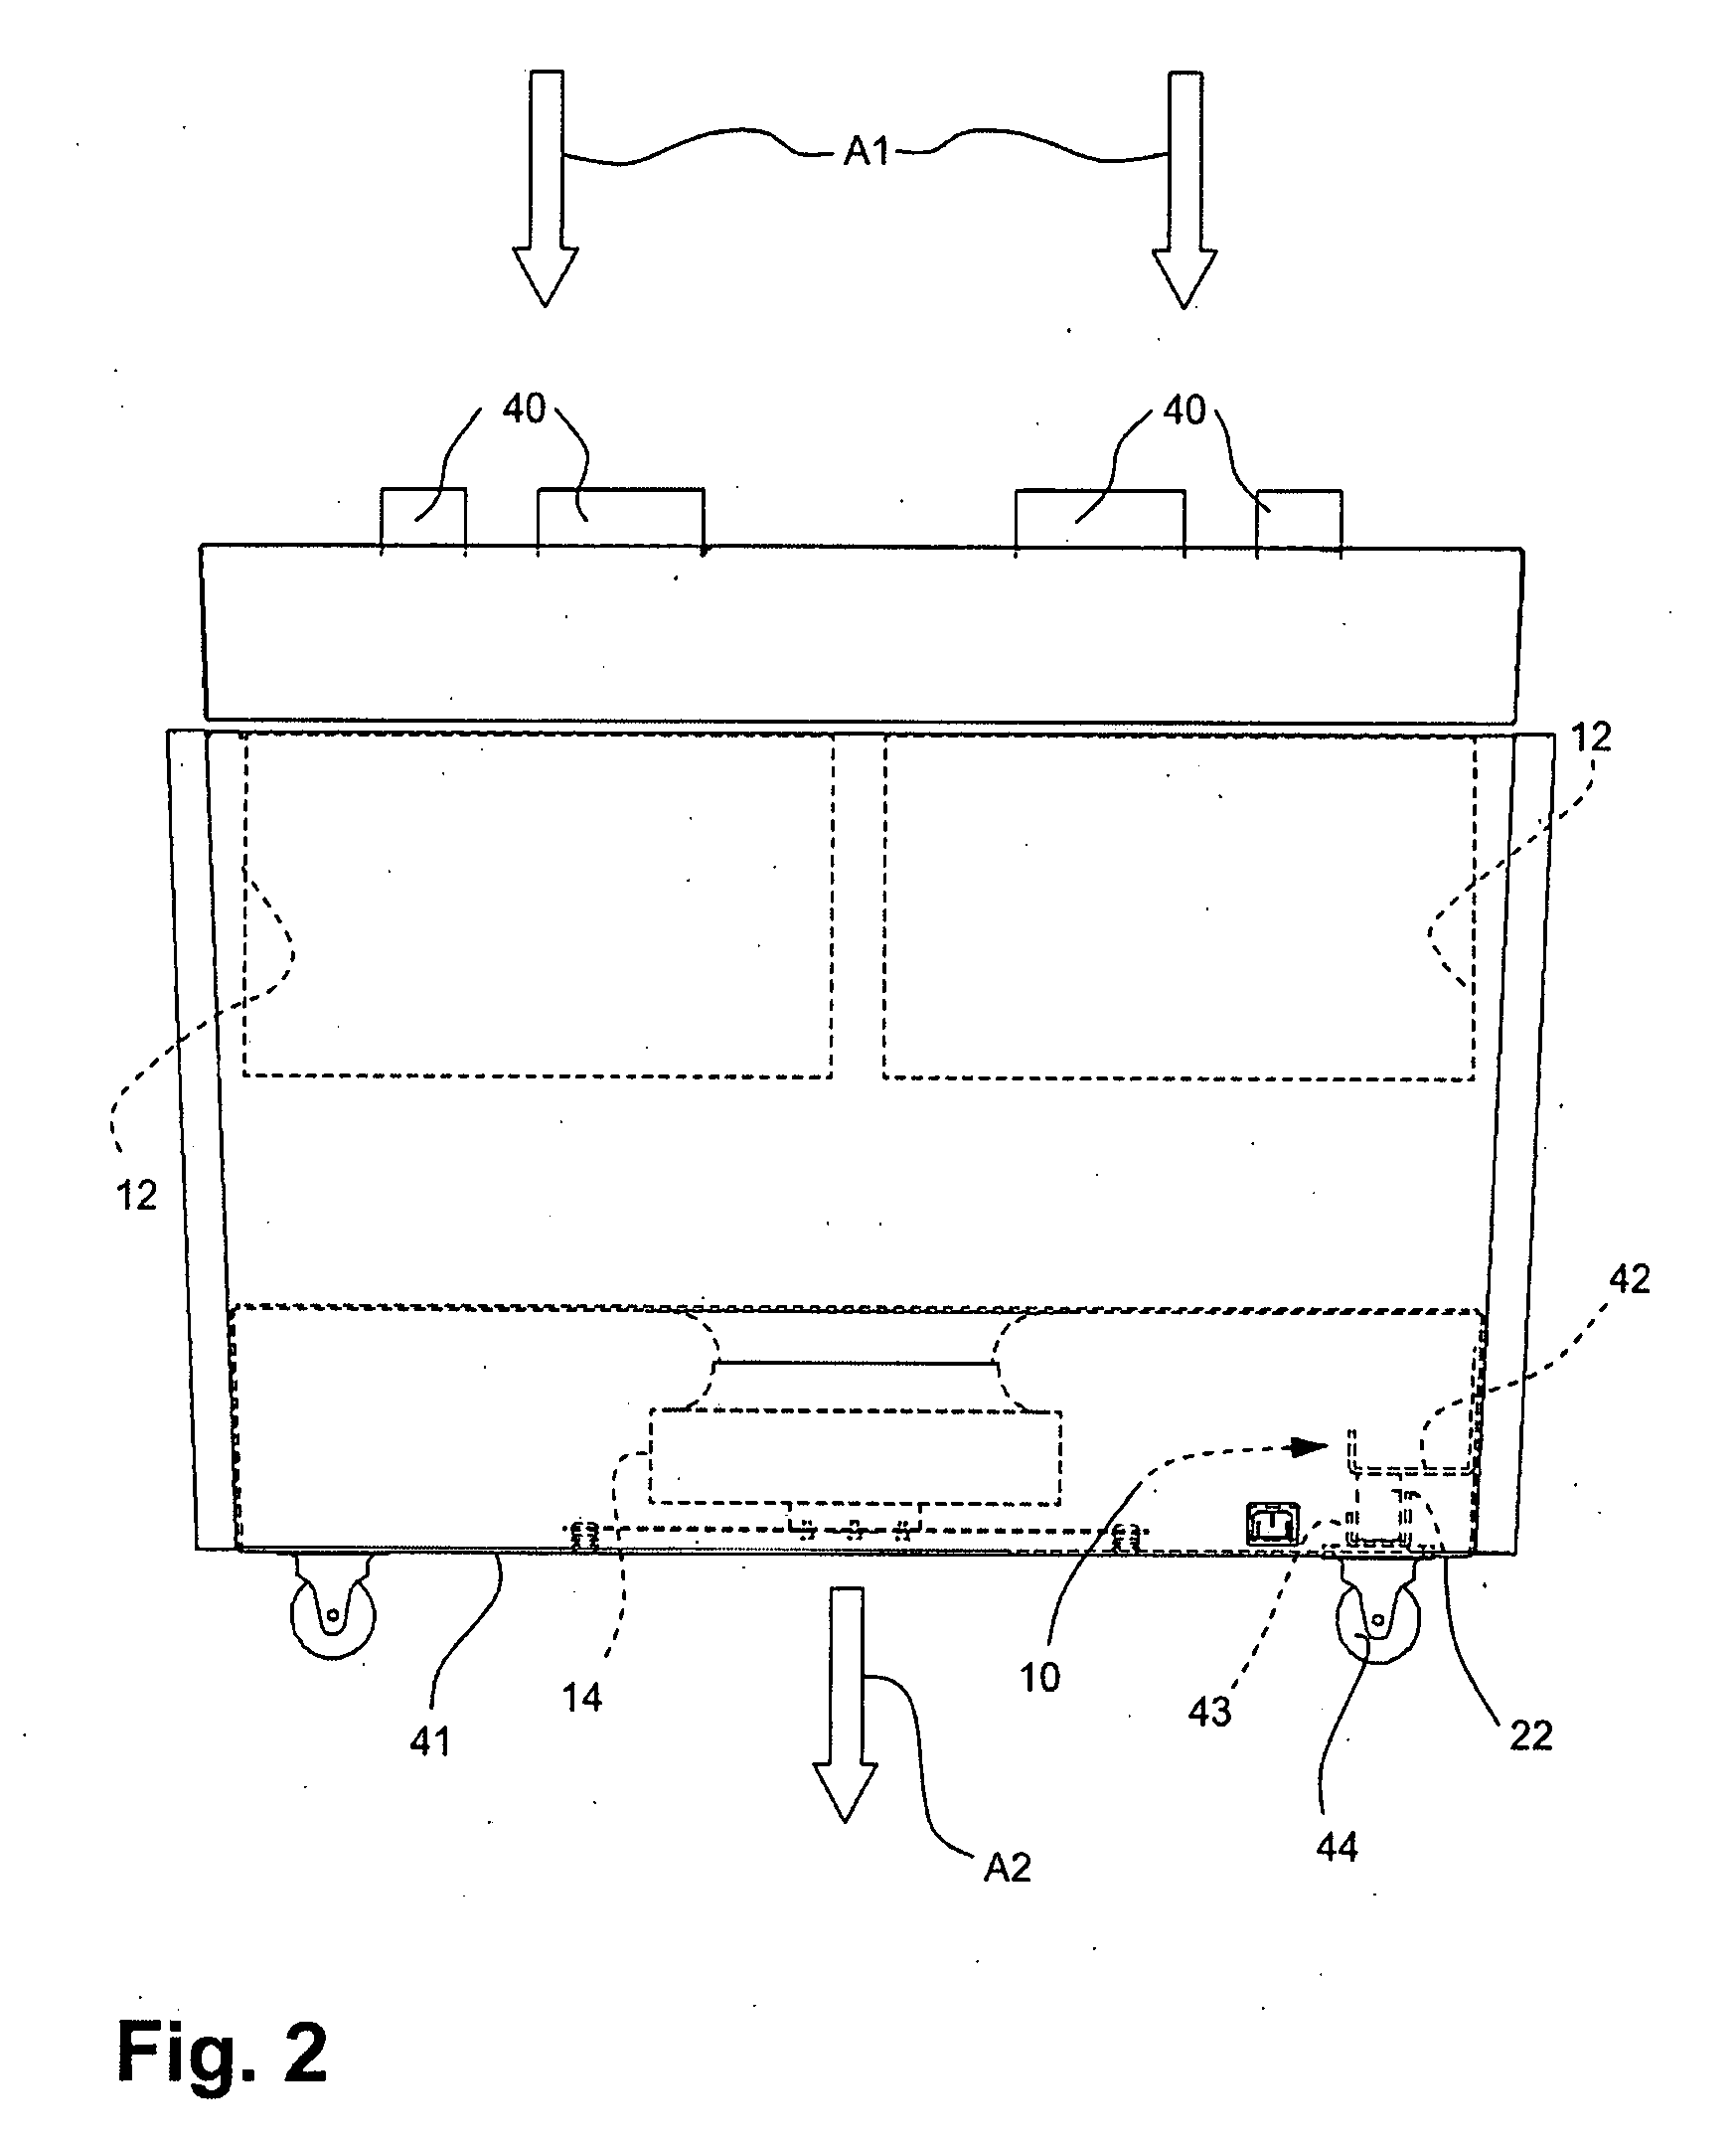 Filter saturation control system